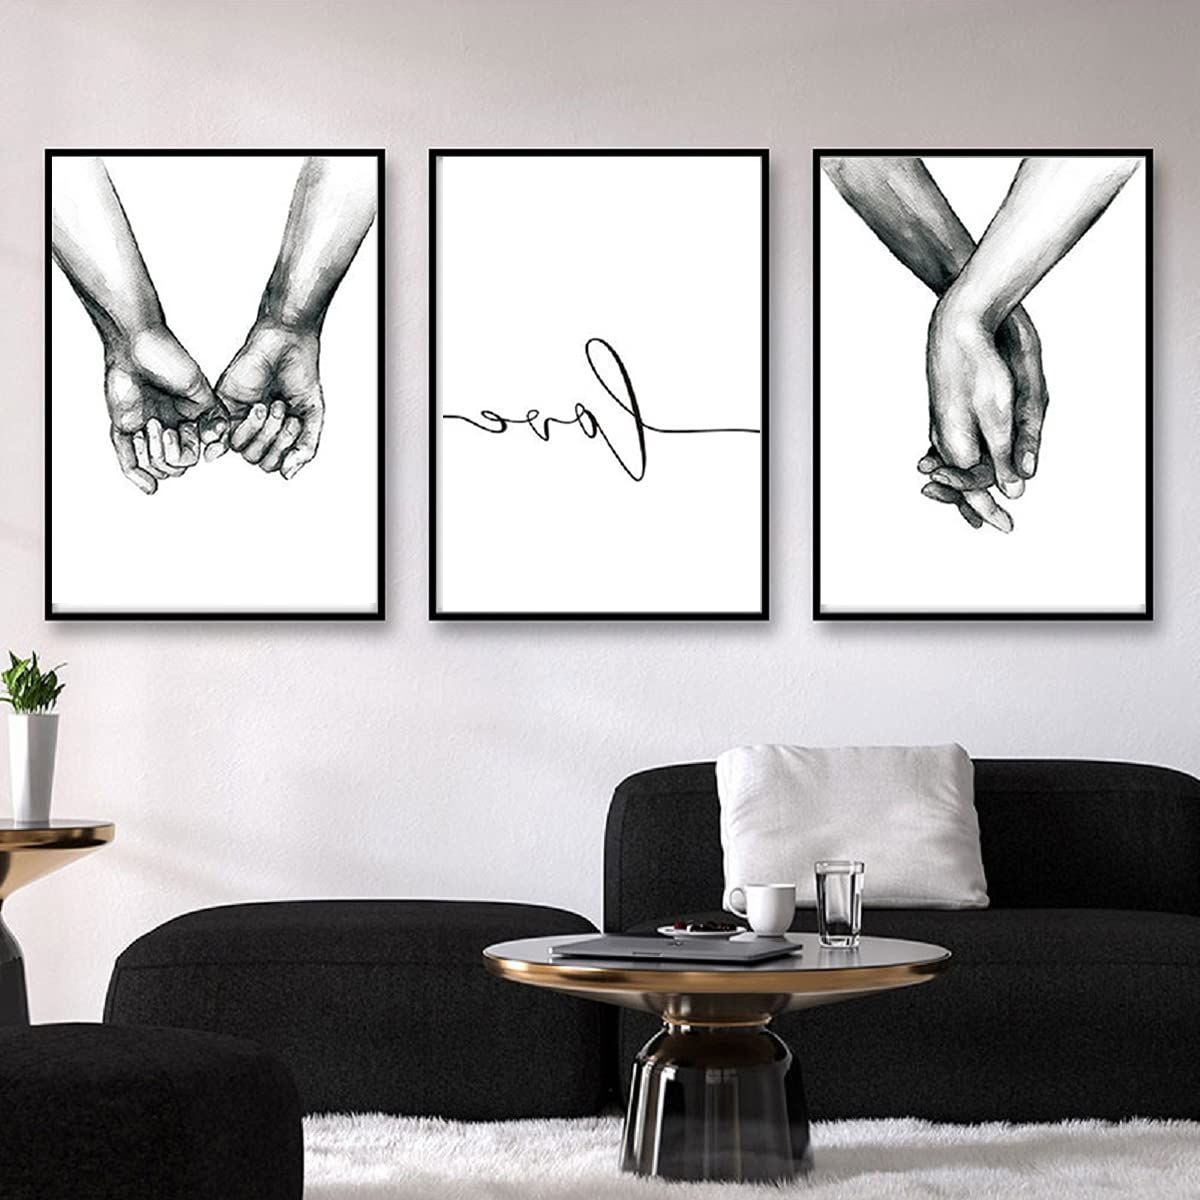 Widely Used Minimalist Wall Art Throughout Amazon: Hands Forever No Framed Canvas Wall Art,love And Hand In Hand Minimalist  Wall Art,black And White Canvas Line Art Print Poster,wall Art Sketch Art  Line Painting For Bedroom: Posters & Prints (View 12 of 15)